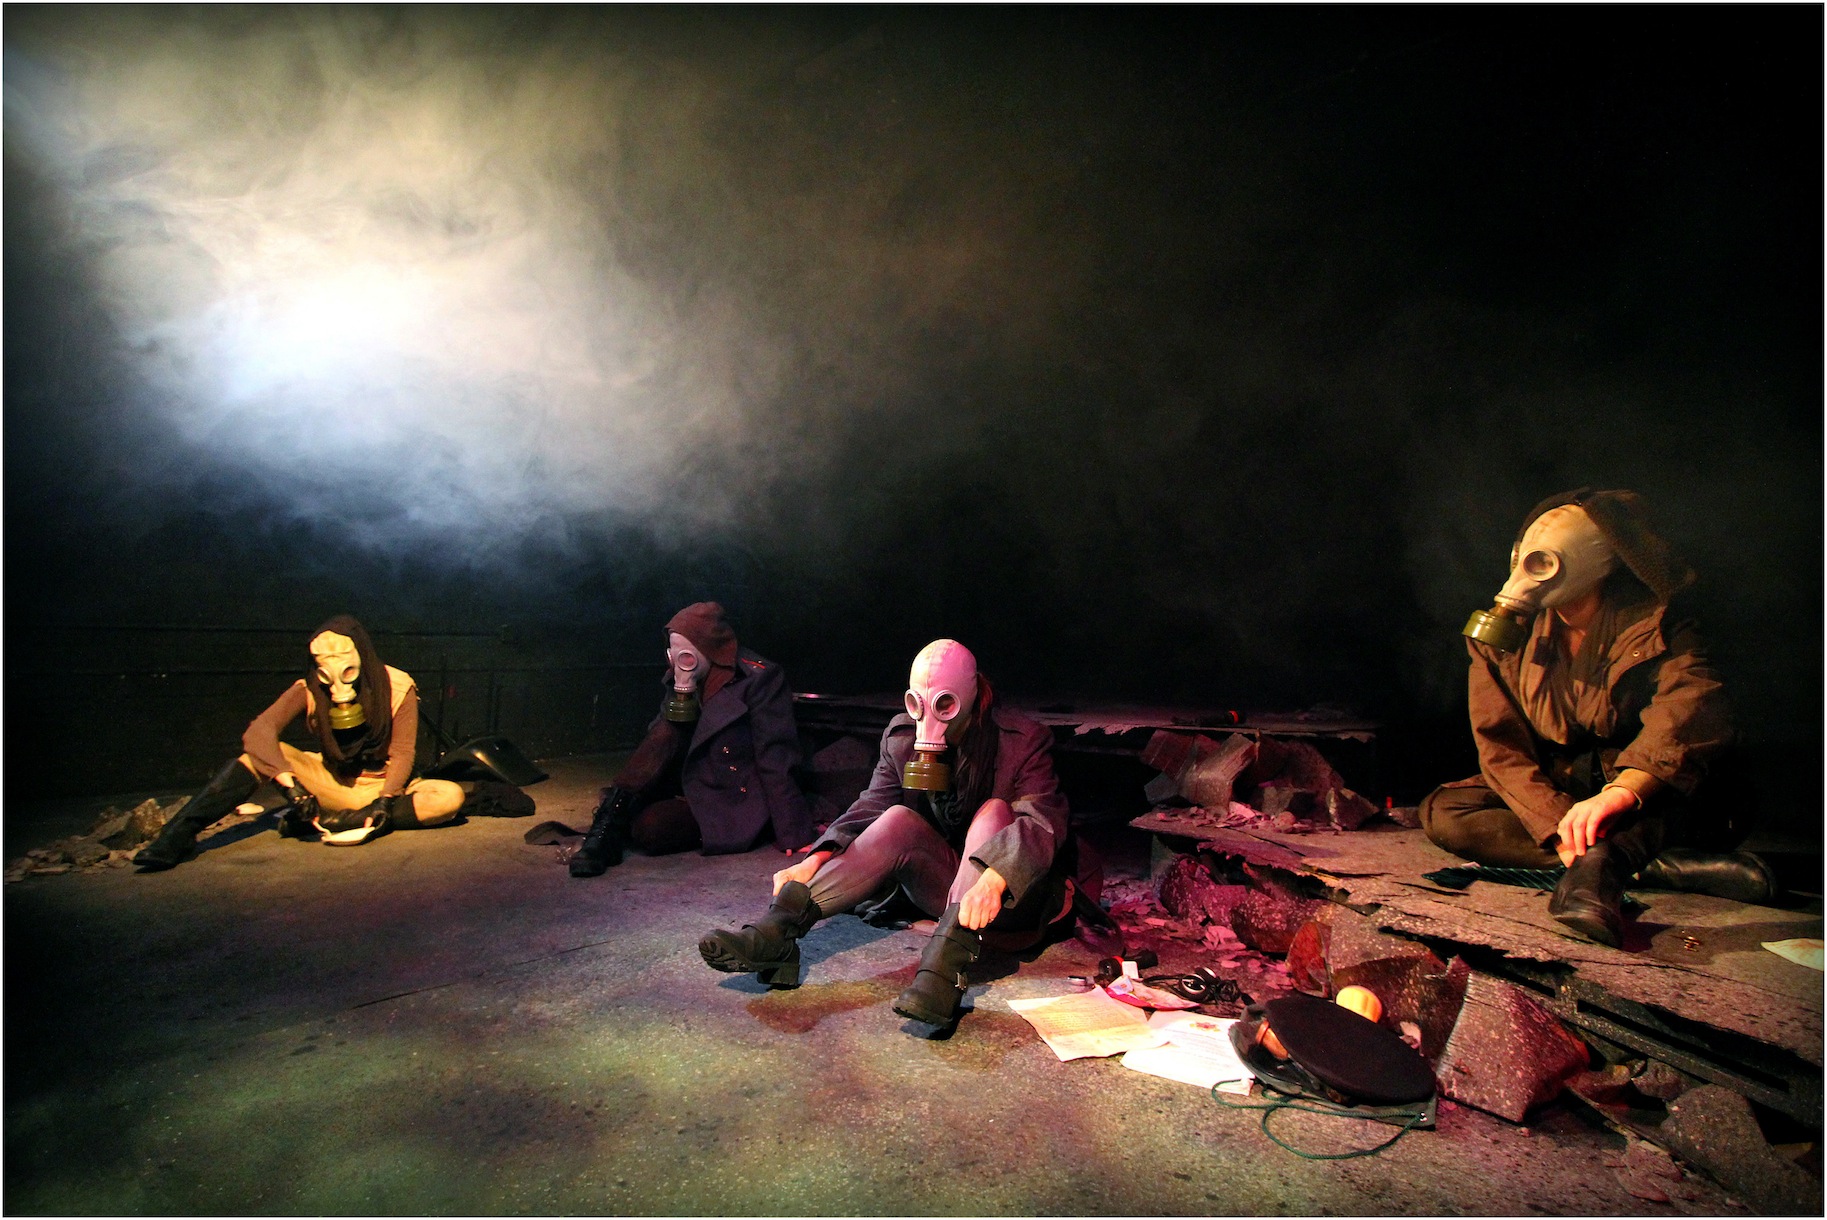 Theatre On Mars: <em>Shoot, I Didn’t Mean That/The Last Days of Mankind</em> at the Tristan Bates Theatre